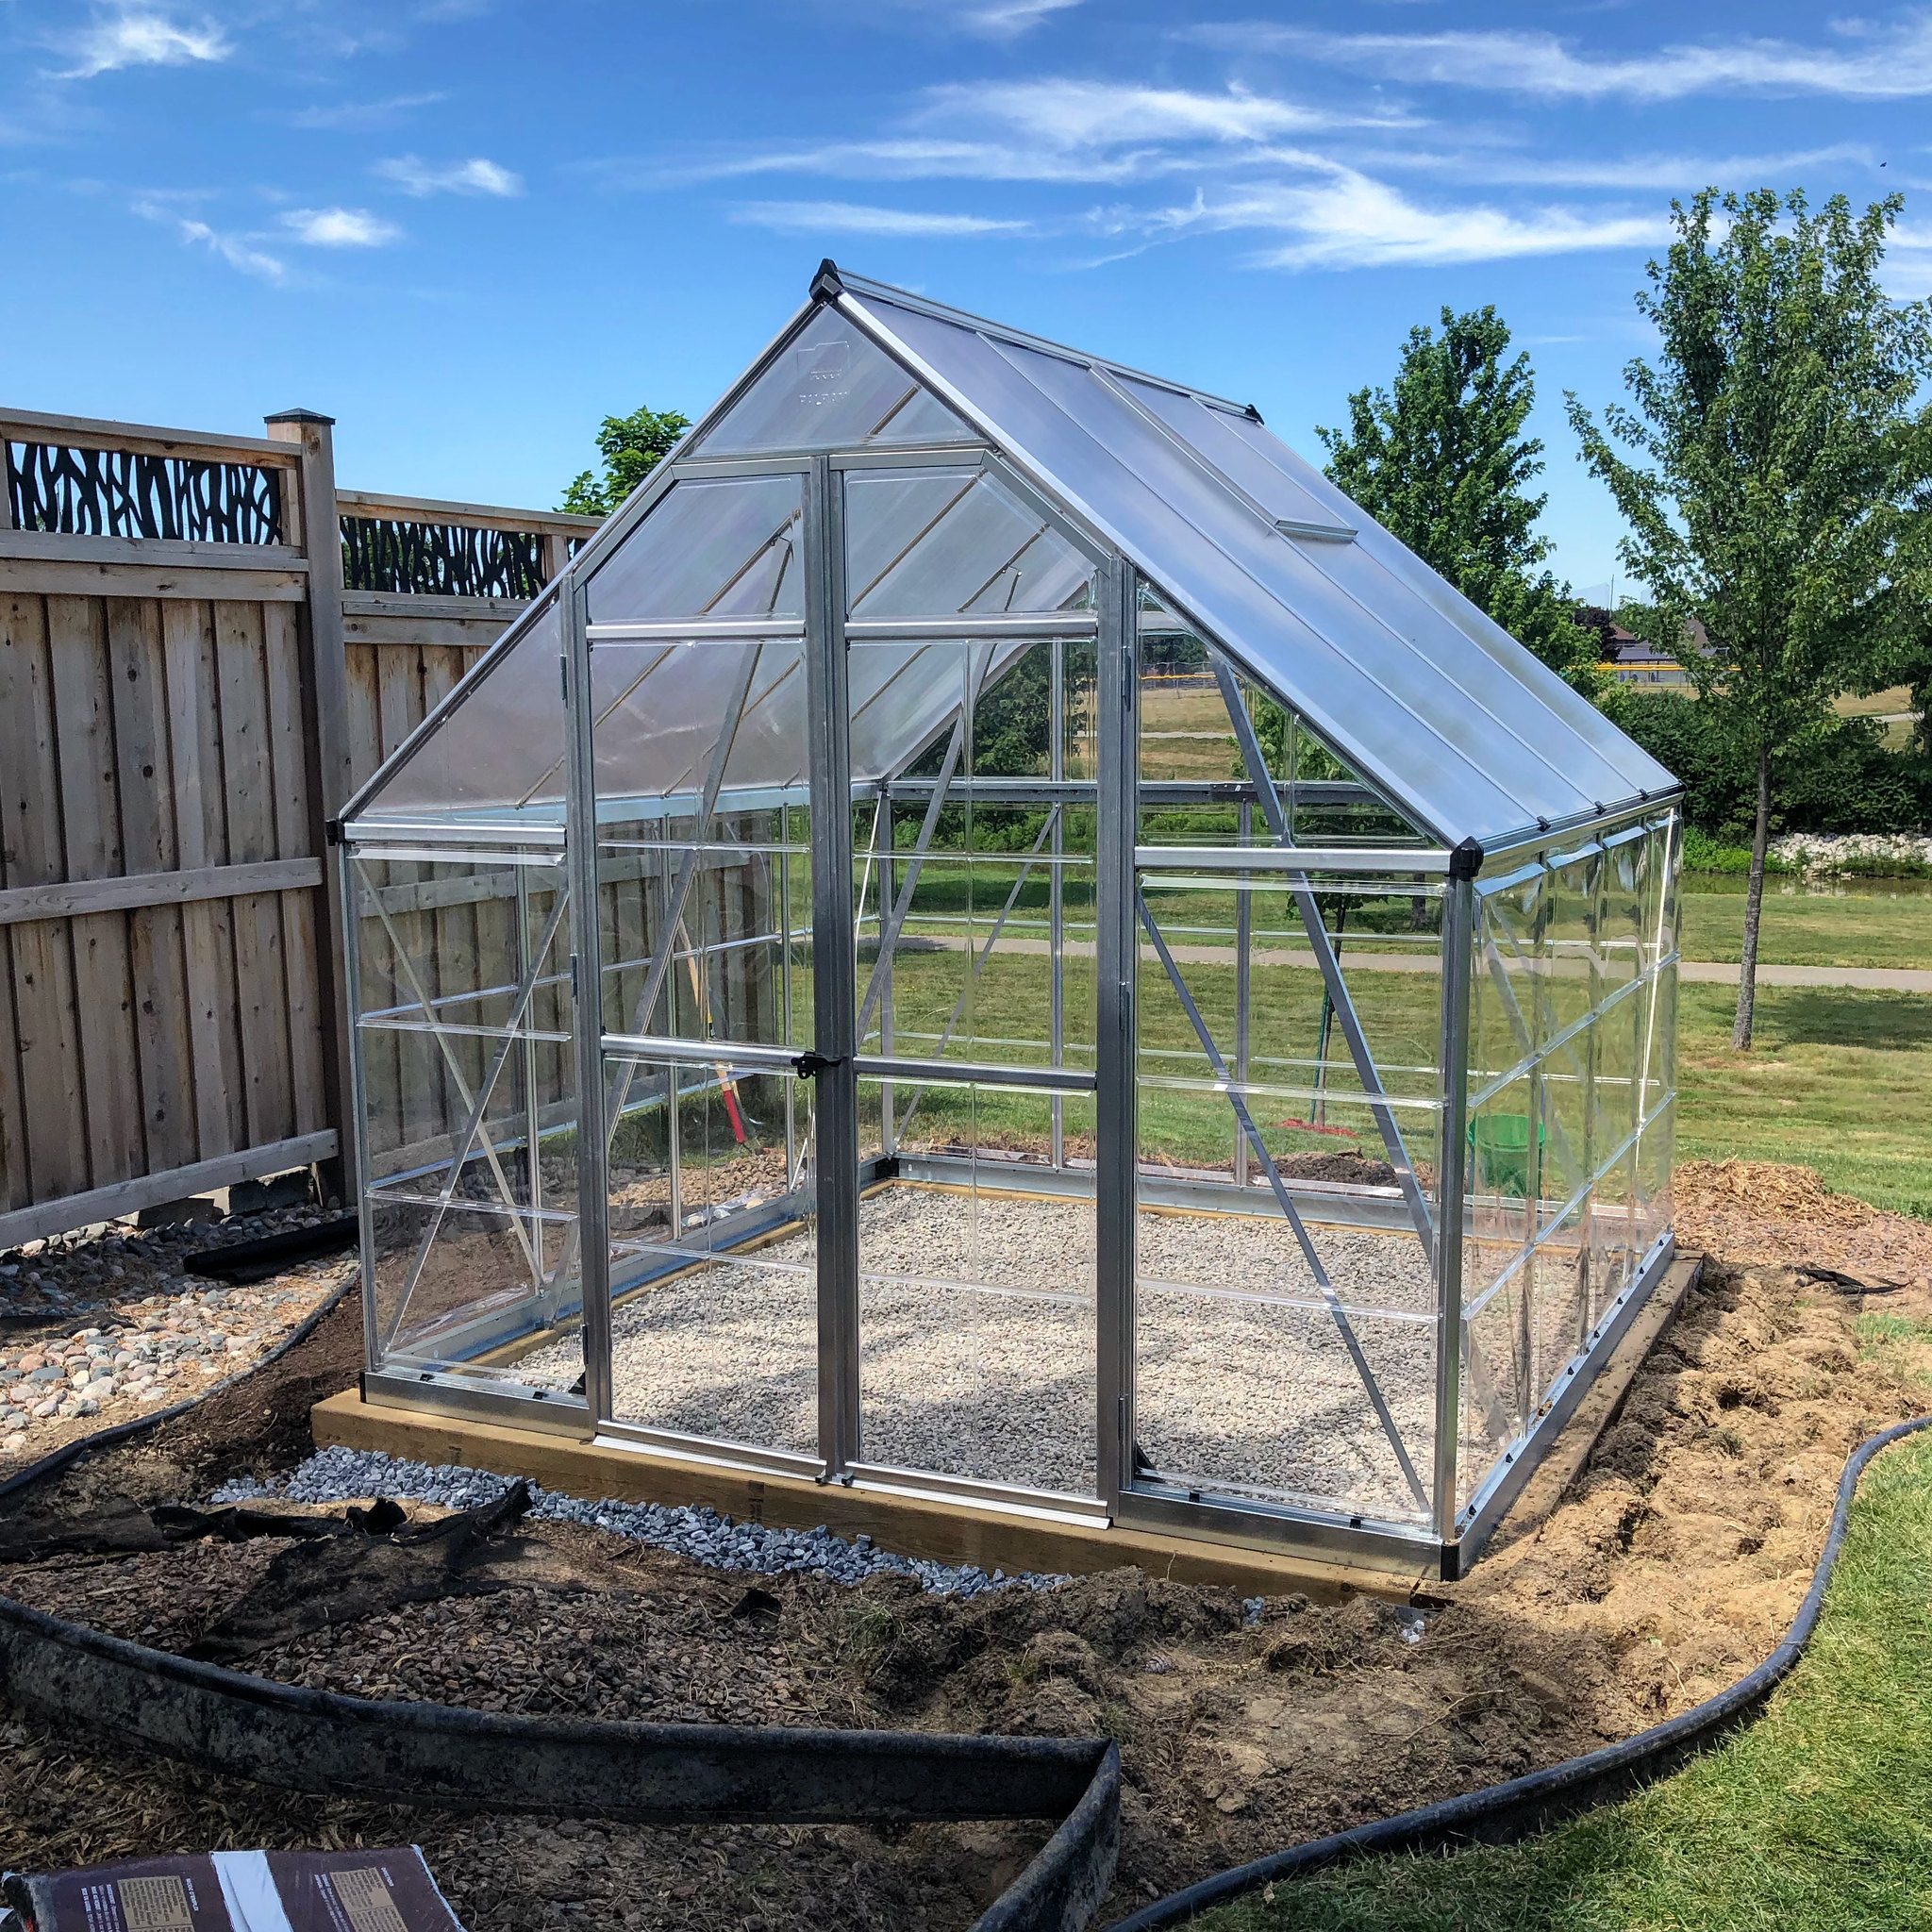 A pressure-treated wood foundation supporting a polycarbonate backyard greenhouse kit